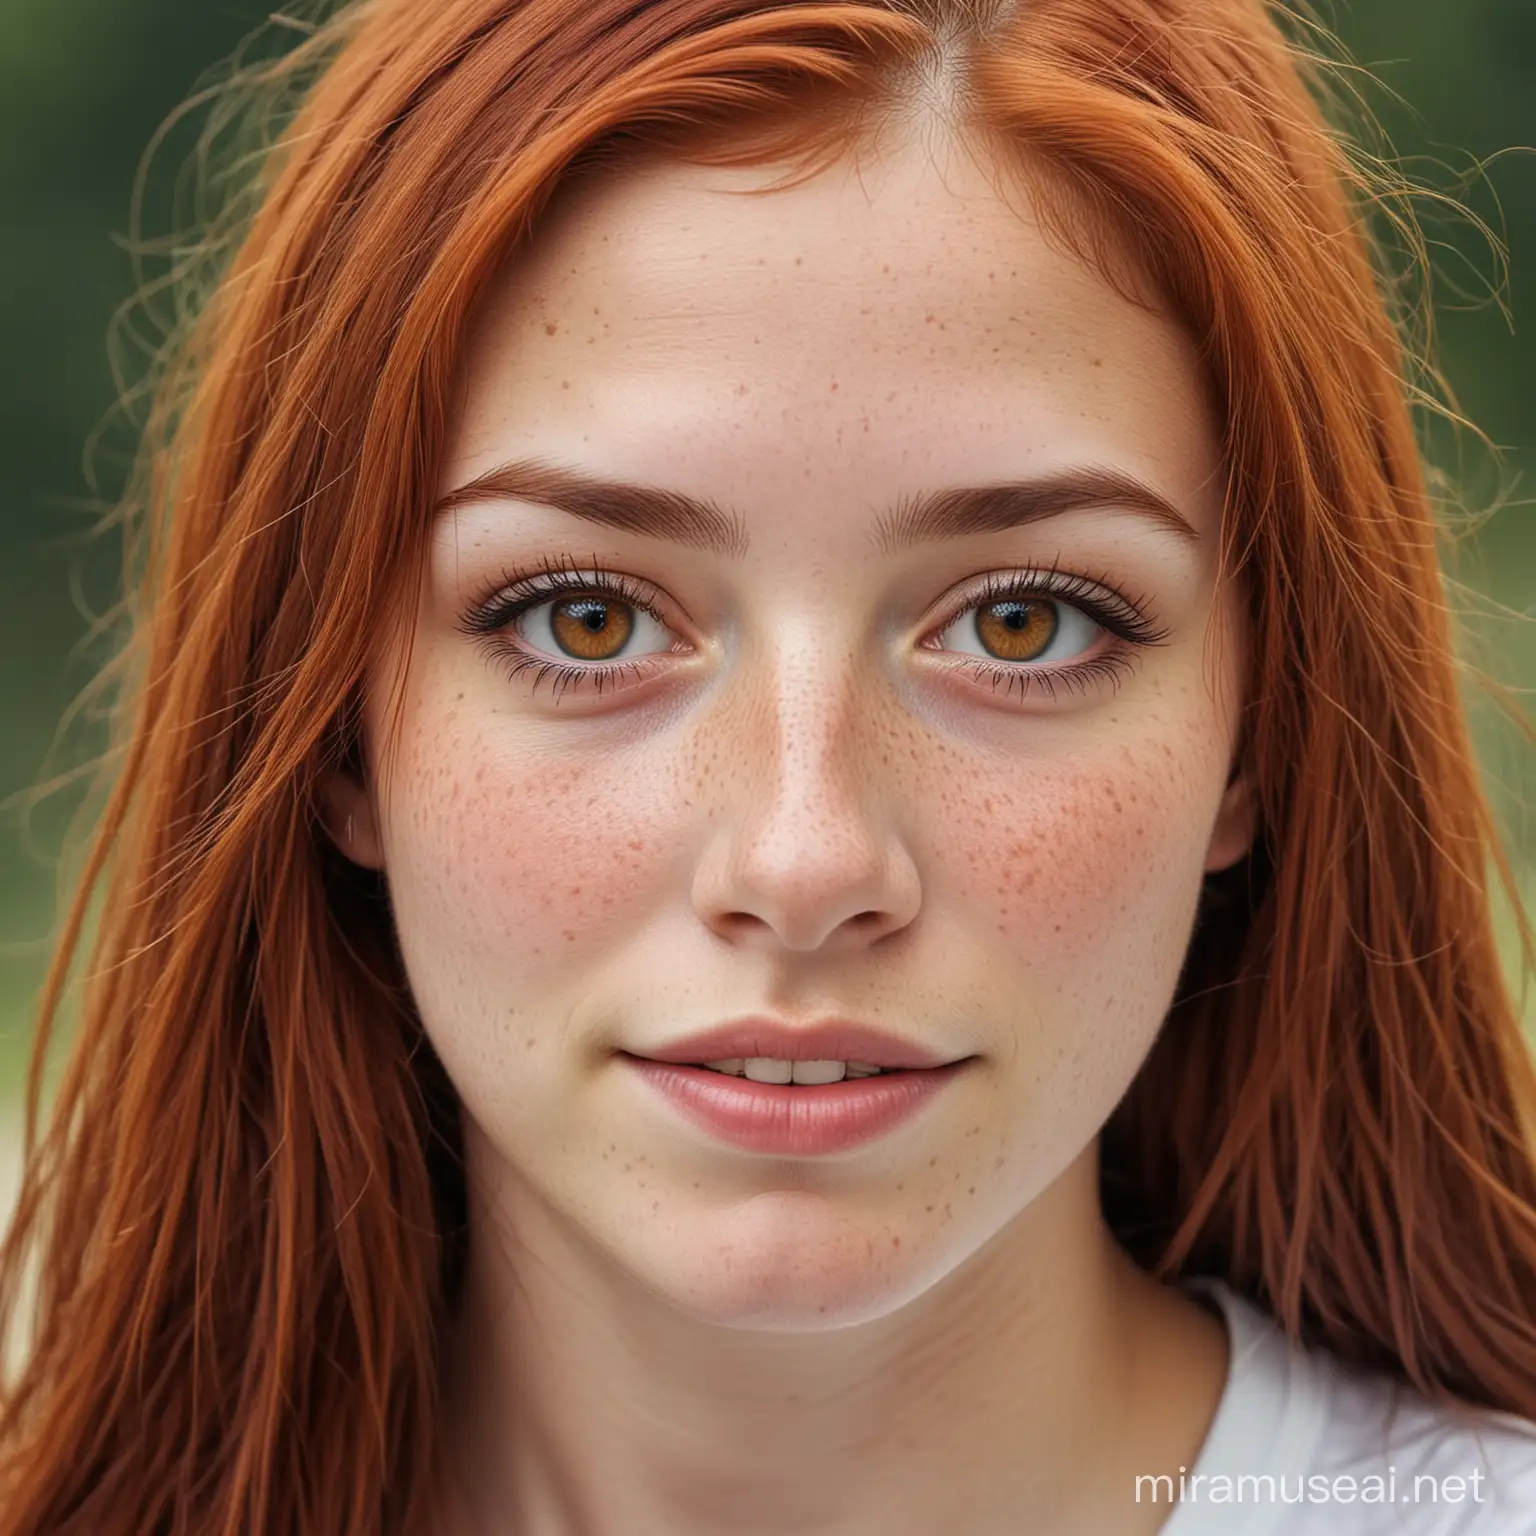 Athletic RedHaired Teenage Girl with Freckles Smiling Cheerfully